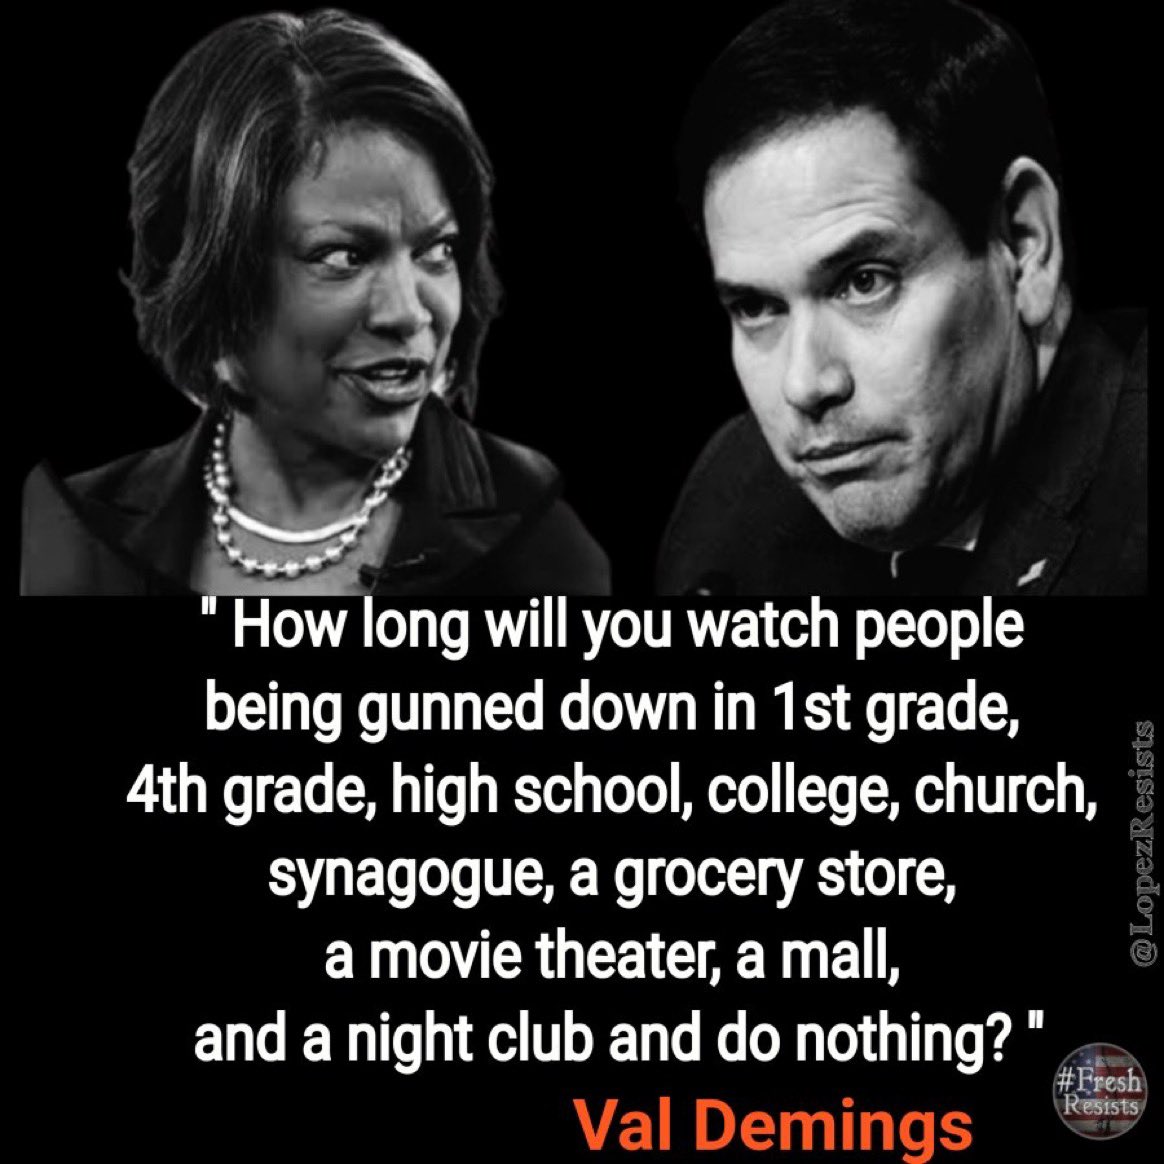 Marco Rubio has taken more that $3MIL from the NRA. He’s not tough on crime. He’s soft on protecting kids in schools from gun crime because the NRA bought him. Want tough on crime? Vote @valdemings for Florida Senate! #FreshResists #wtpBLUE